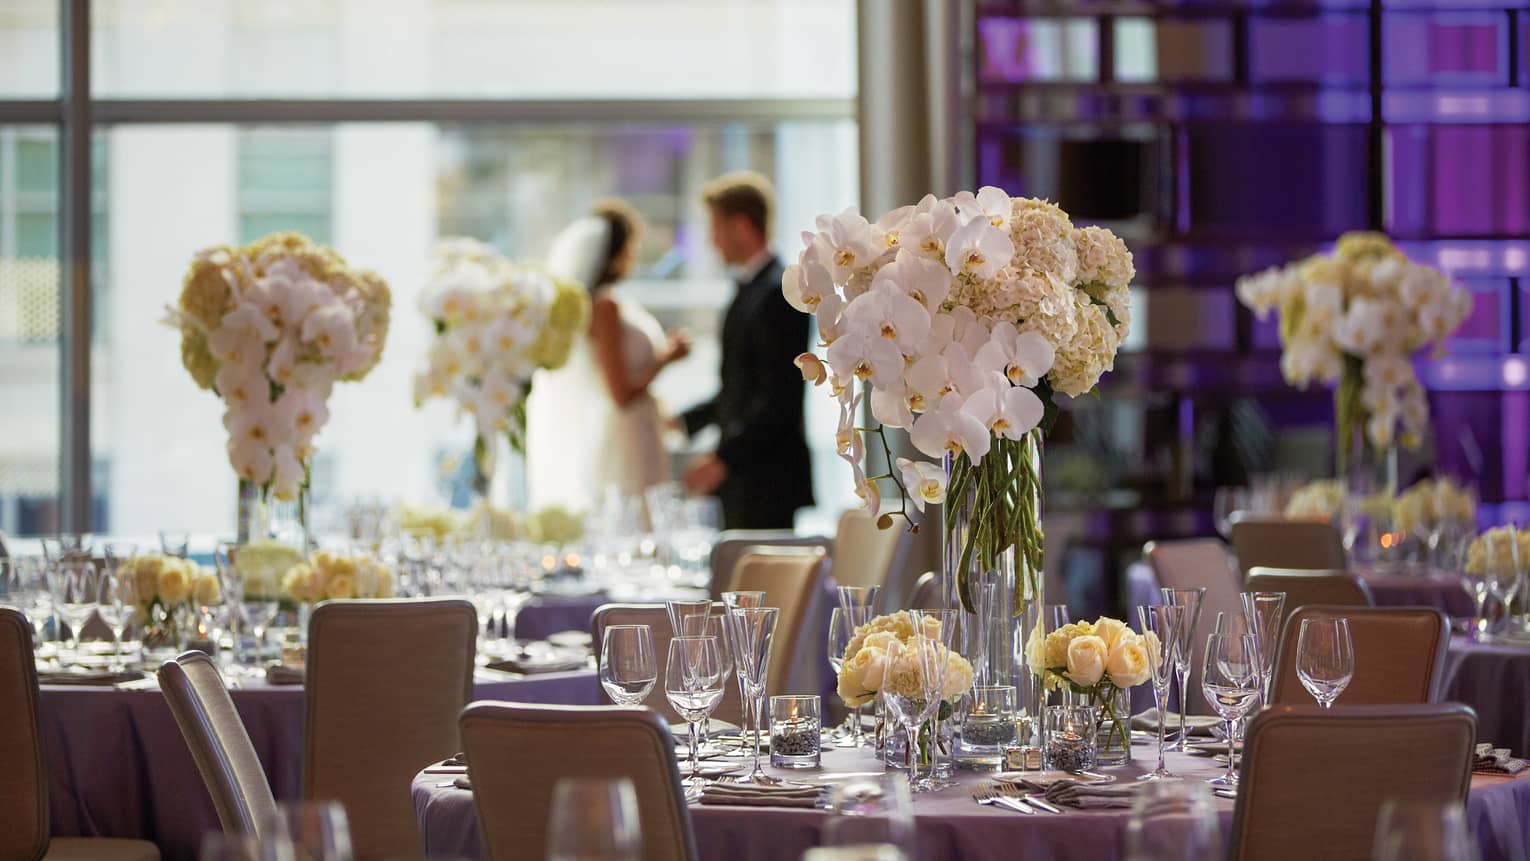 Wedding tables with white orchid centrepieces, bride and groom by sunny window in background